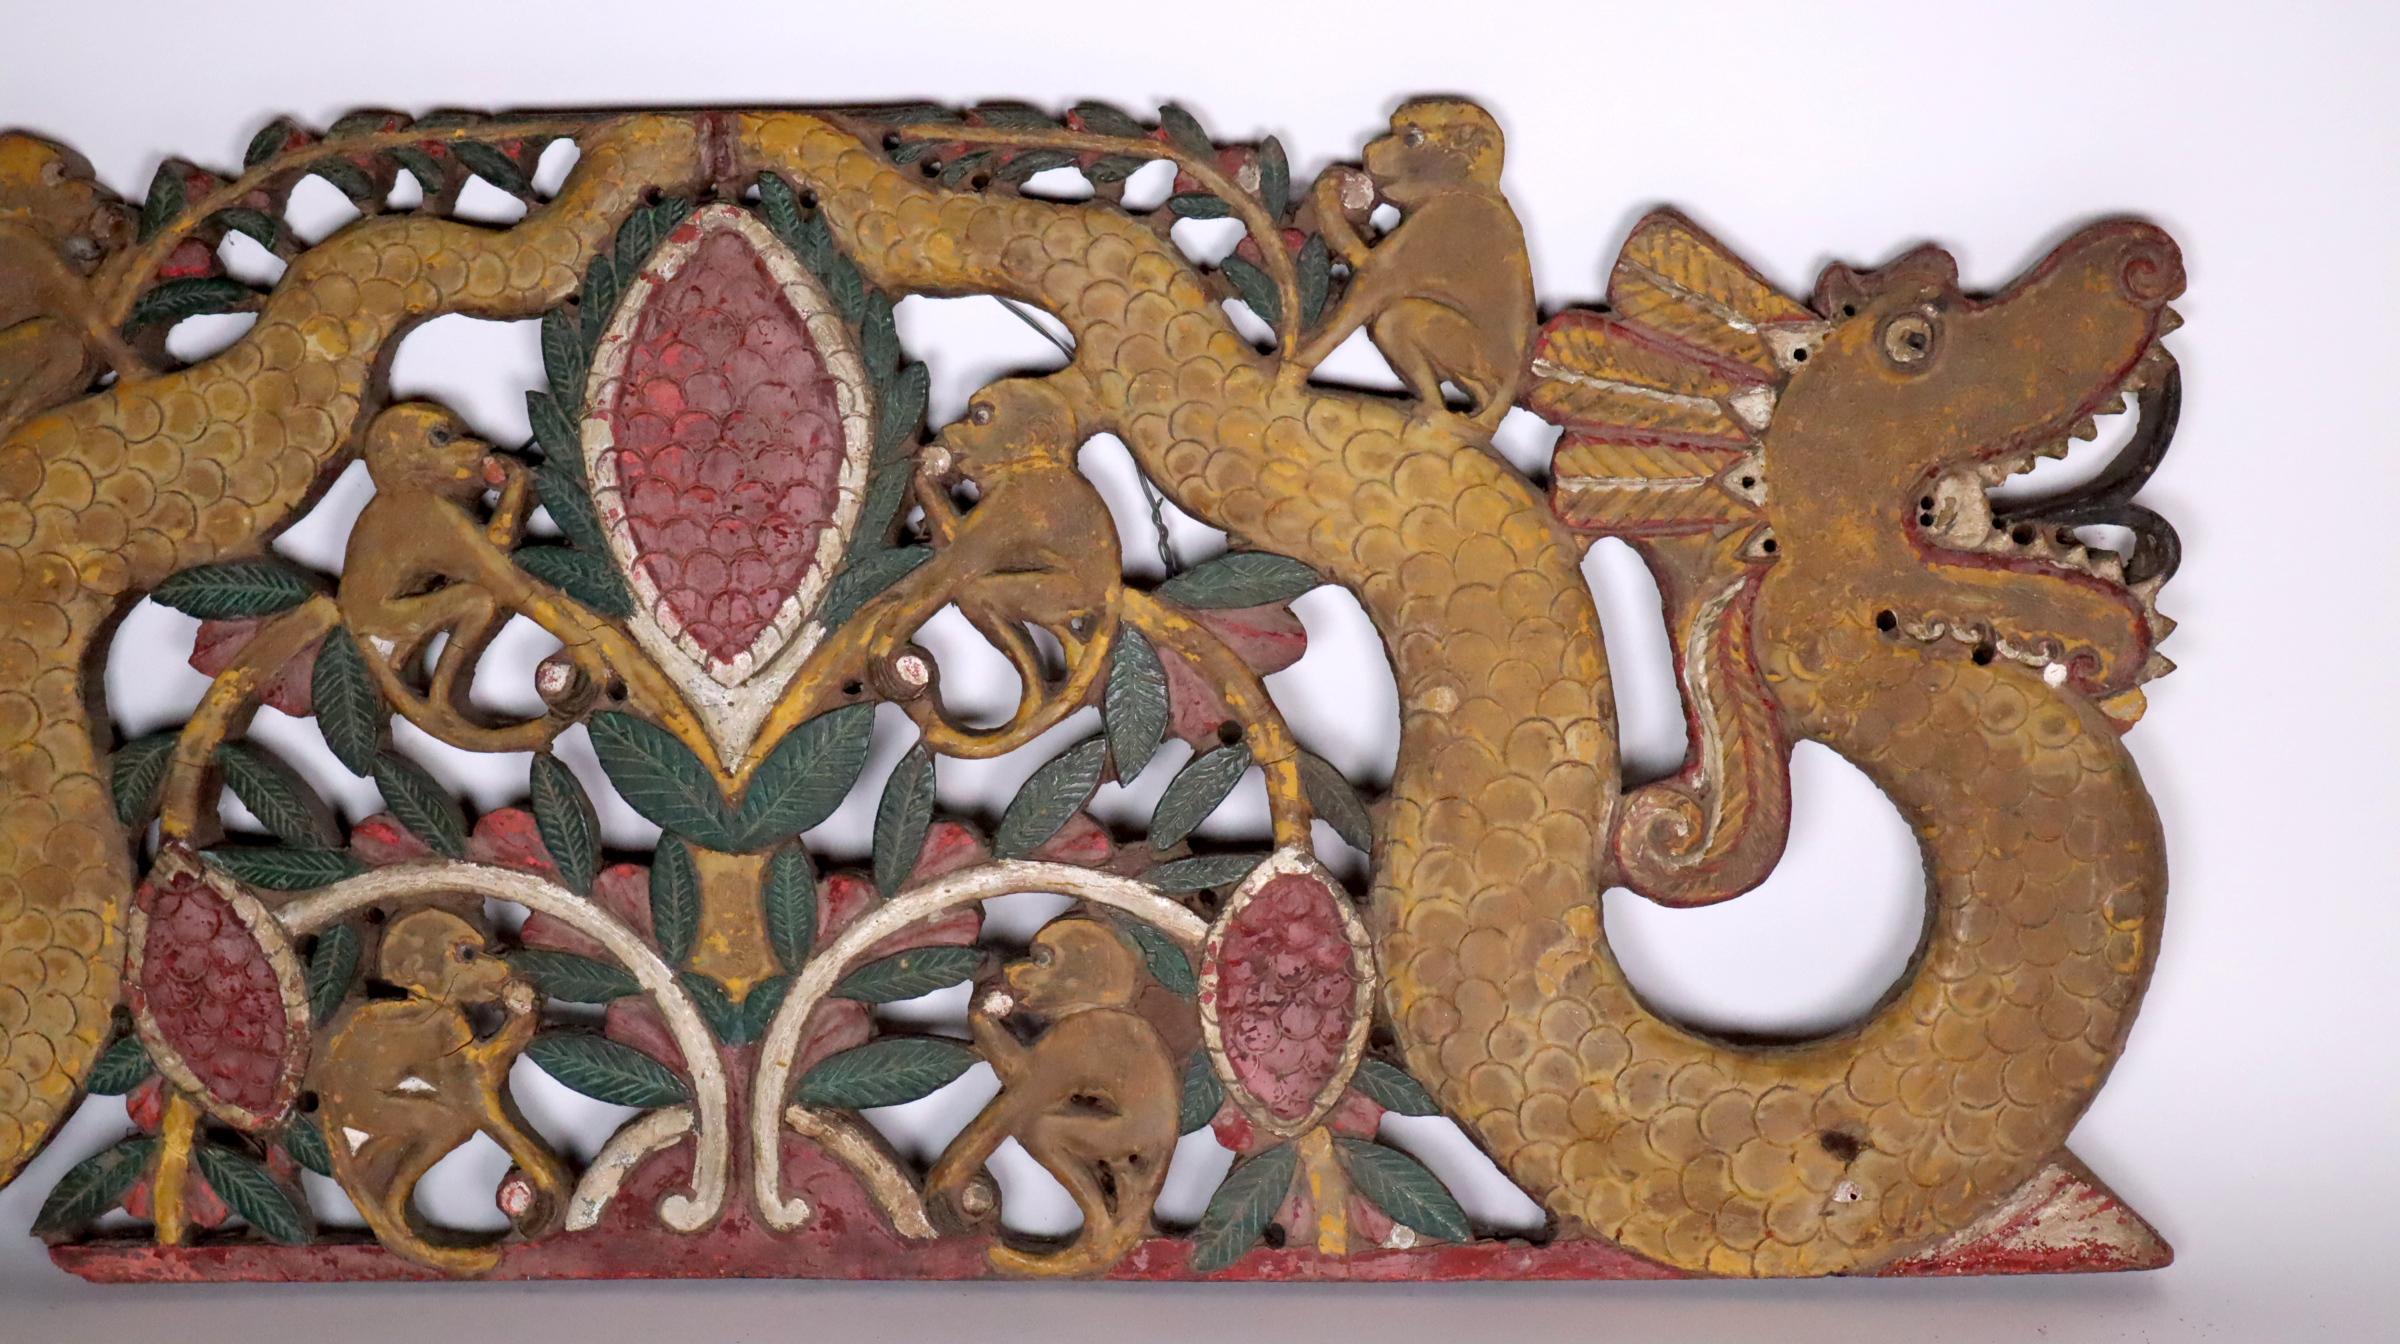 Large colorful painted hardwood plaque from Java, Indonesia. Probably early 20th century. Depicts a fruiting and leafing plant with two large serpents (called naga) wearing feathered crowns, their mouths are open showing teeth and forked tongue. Six